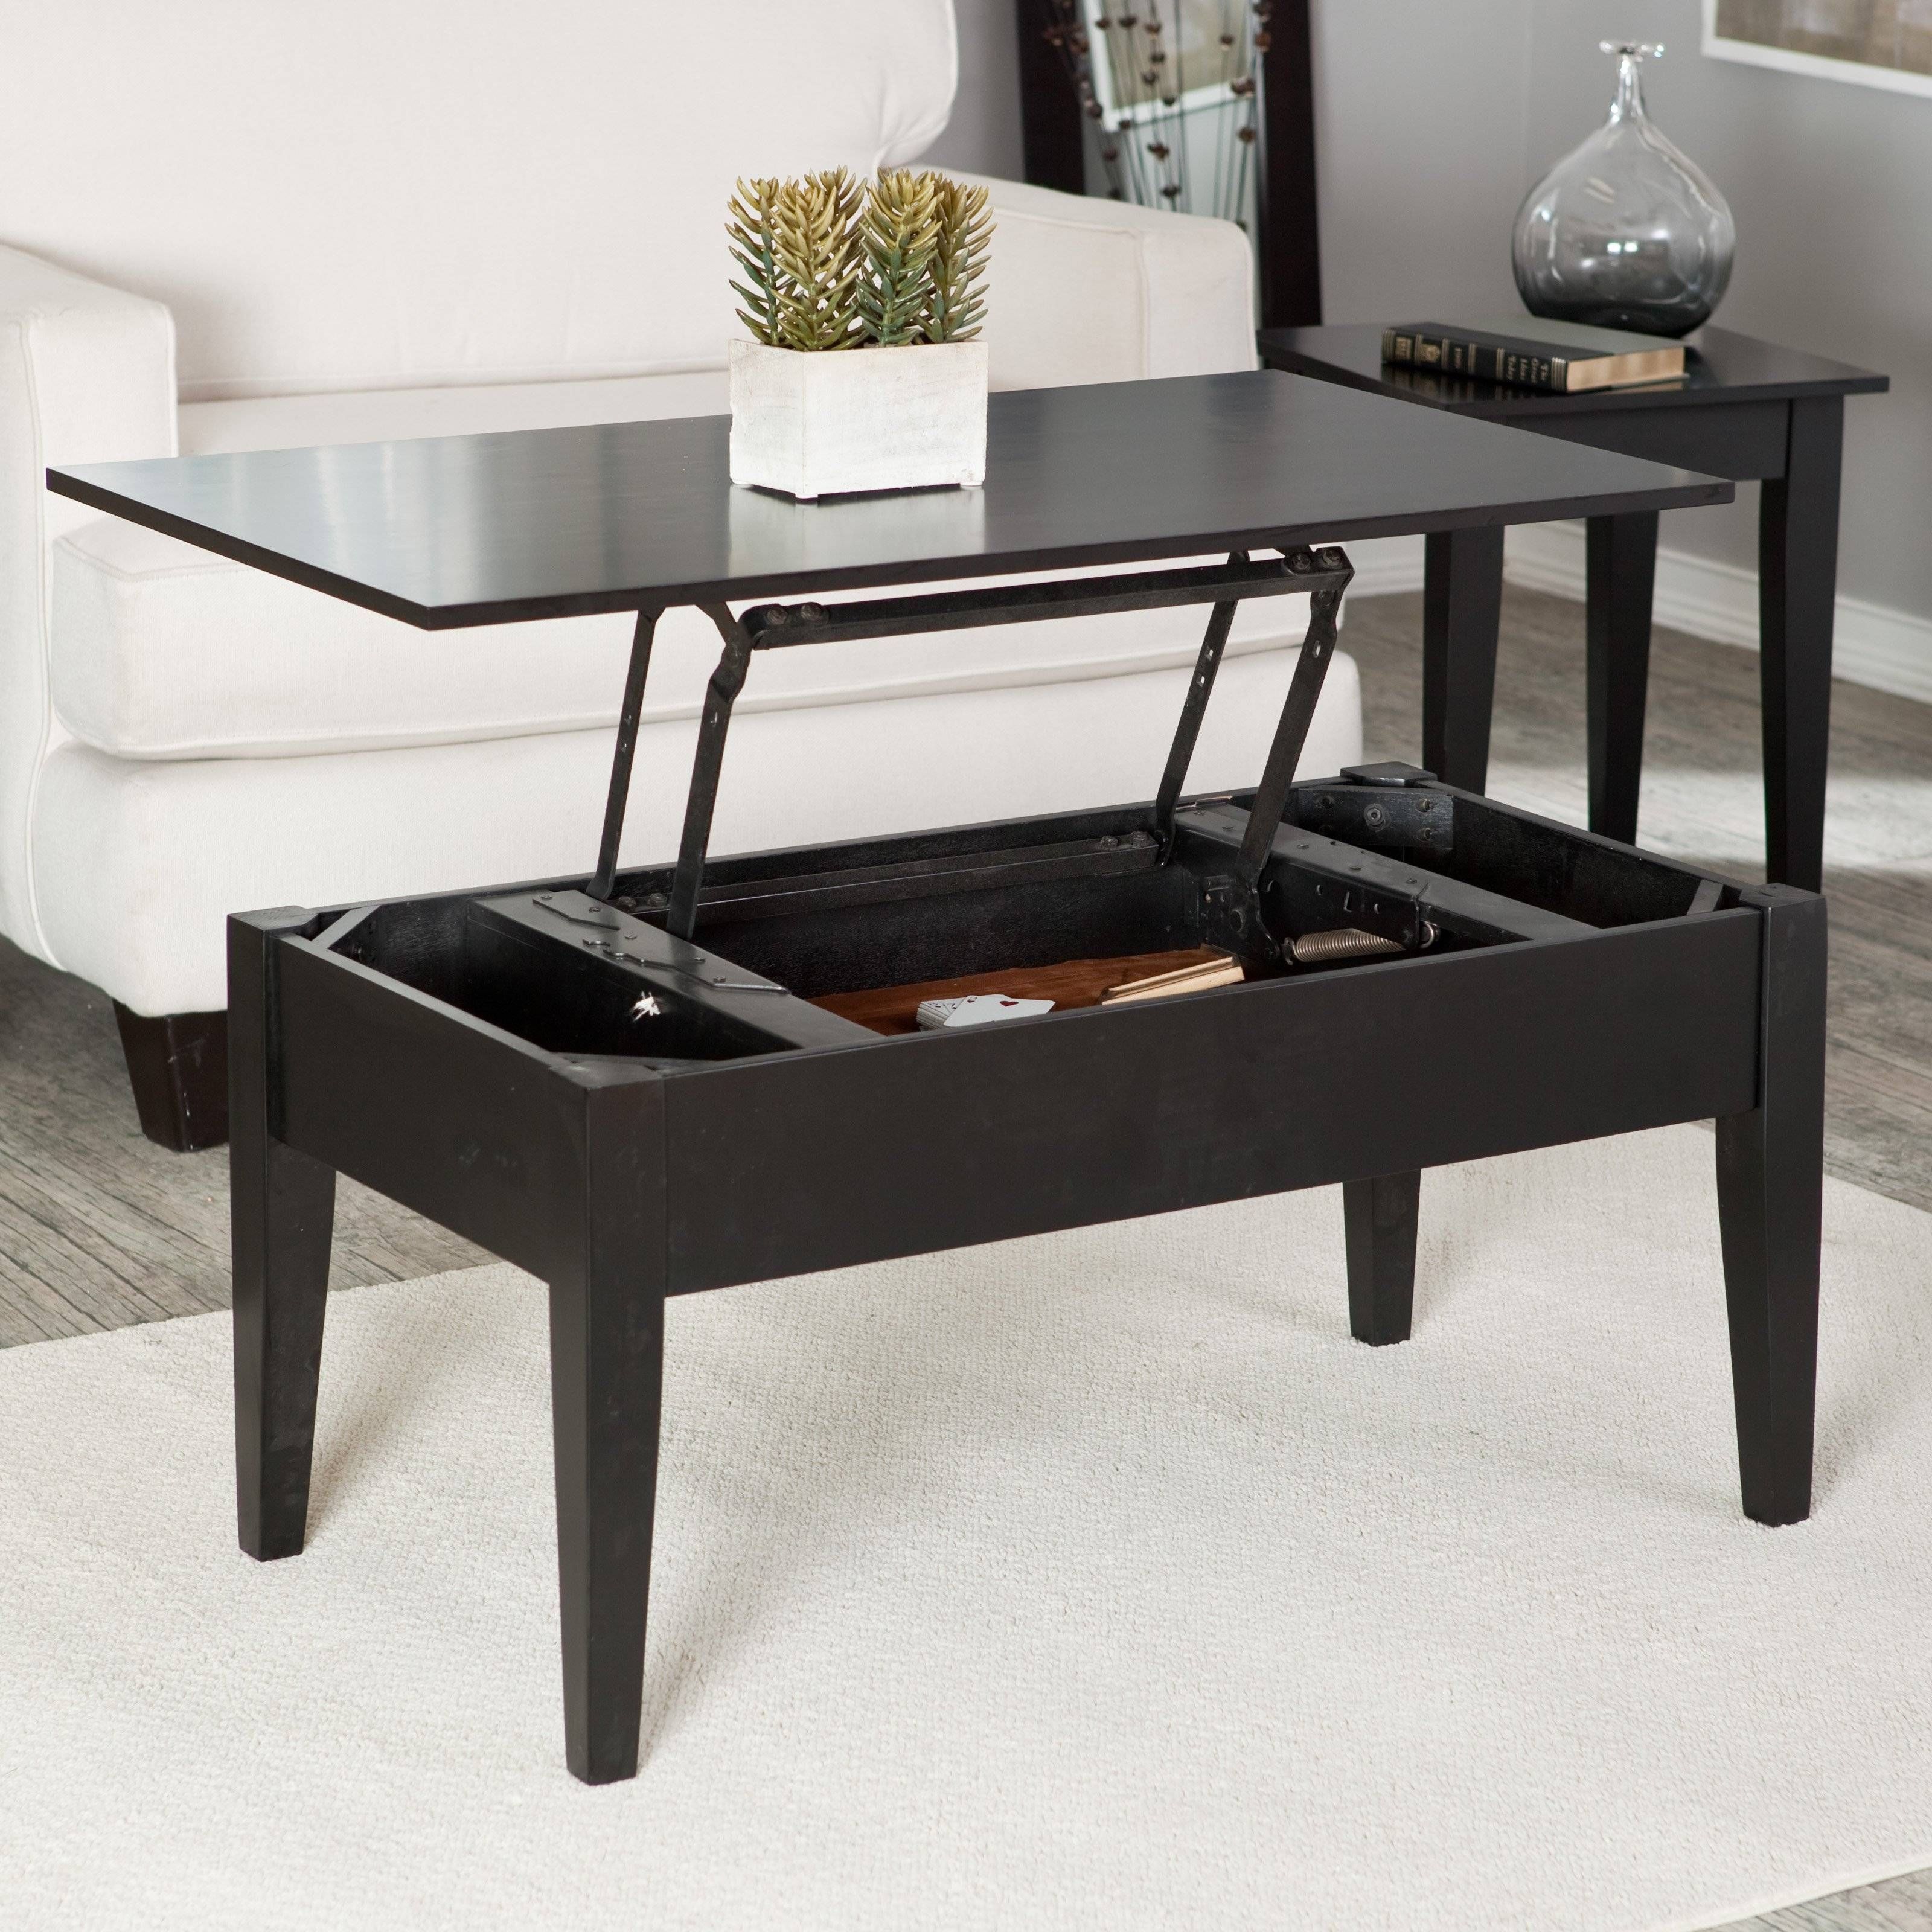 Turner Lift Top Coffee Table – Espresso | Hayneedle Within Top Lifting Coffee Tables (View 3 of 30)